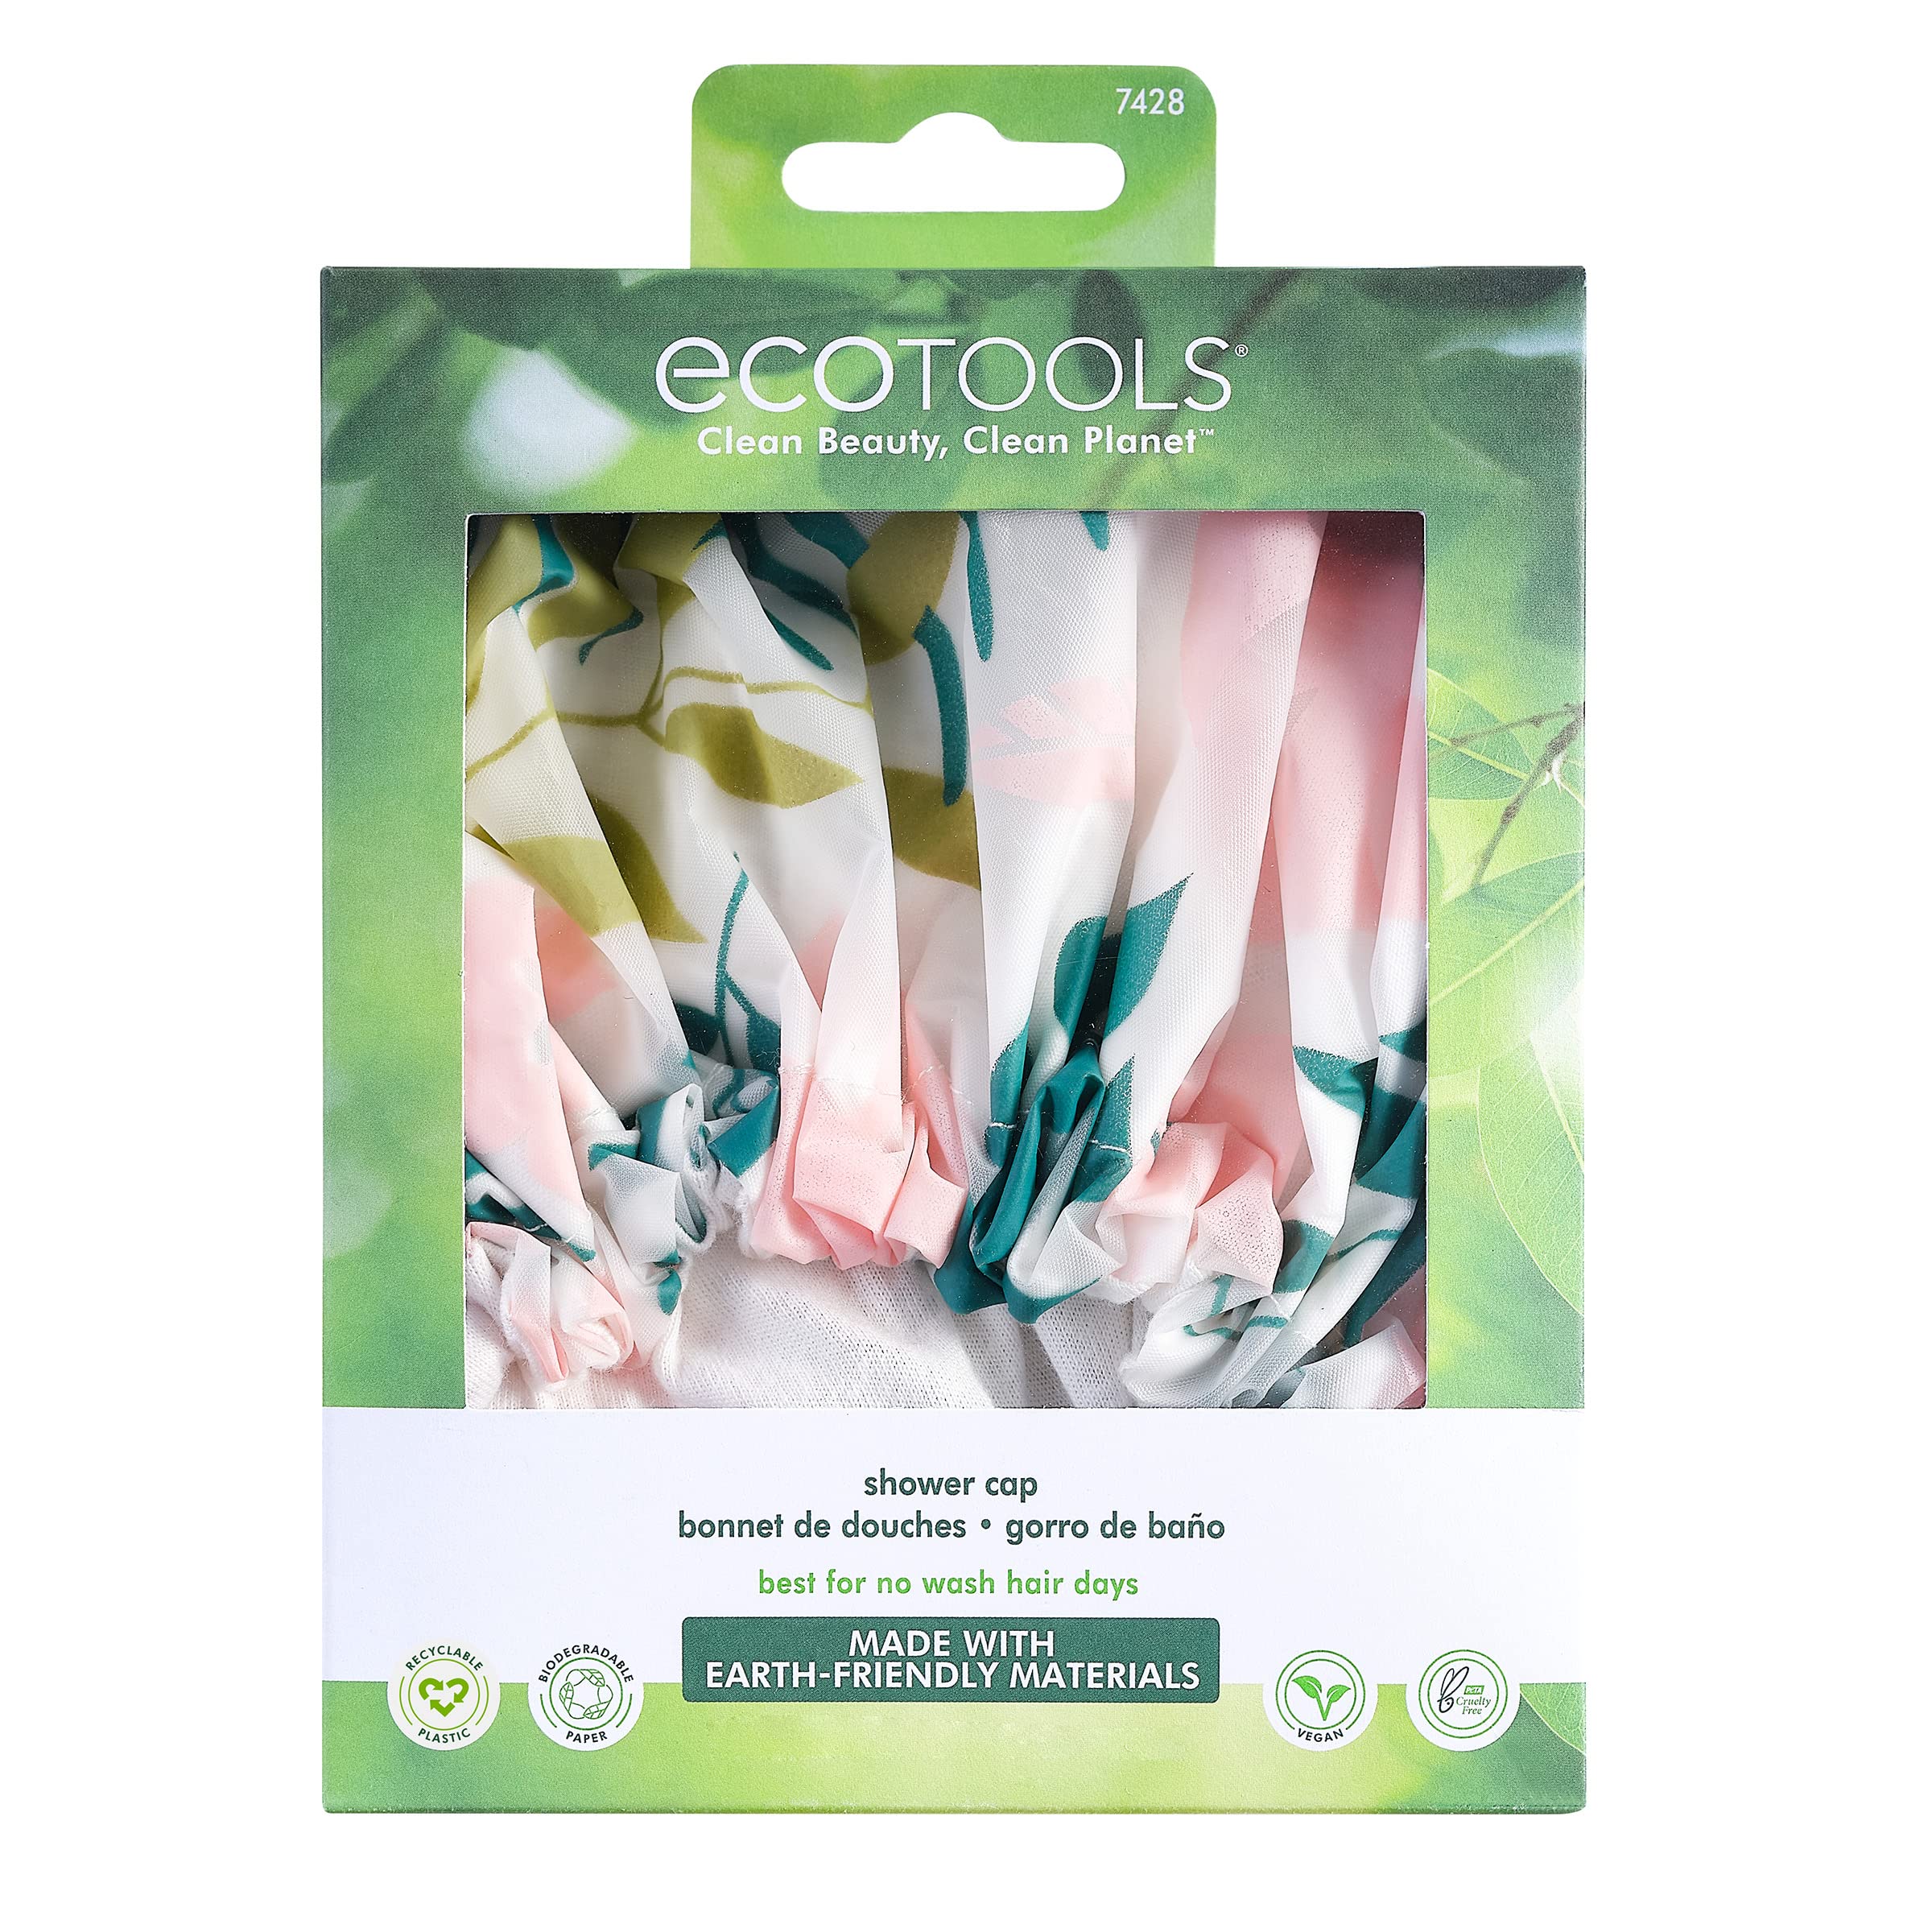 EcoTools Shower Cap, Organic Cotton Lining, Keeps Hair Dry During Shower, Fits All Head Sizes & All Hair Textures, Quick Drying Bath Hair Cap, Eco-Friendly, Cruelty-Free, & Vegan, 1 Count